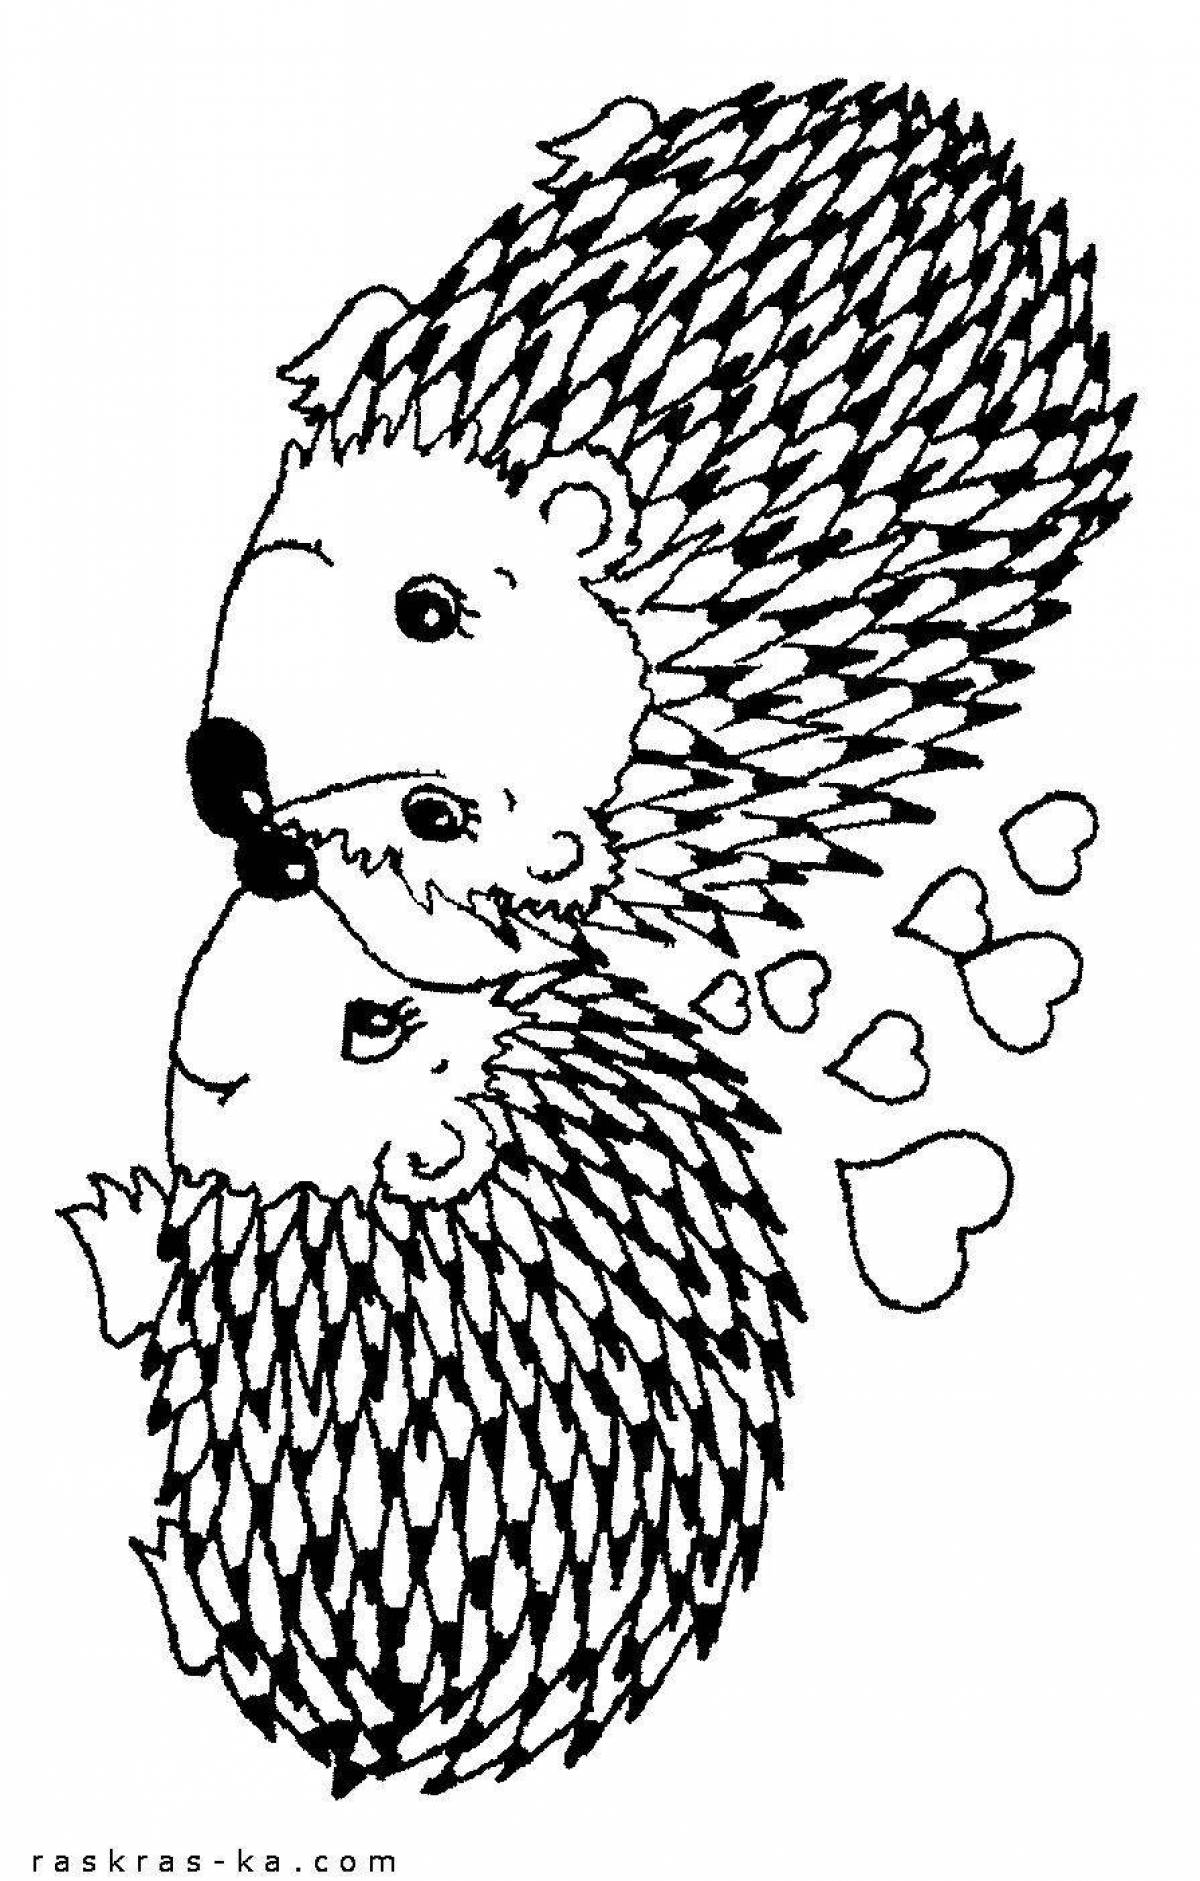 Coloring page funny hedgehog